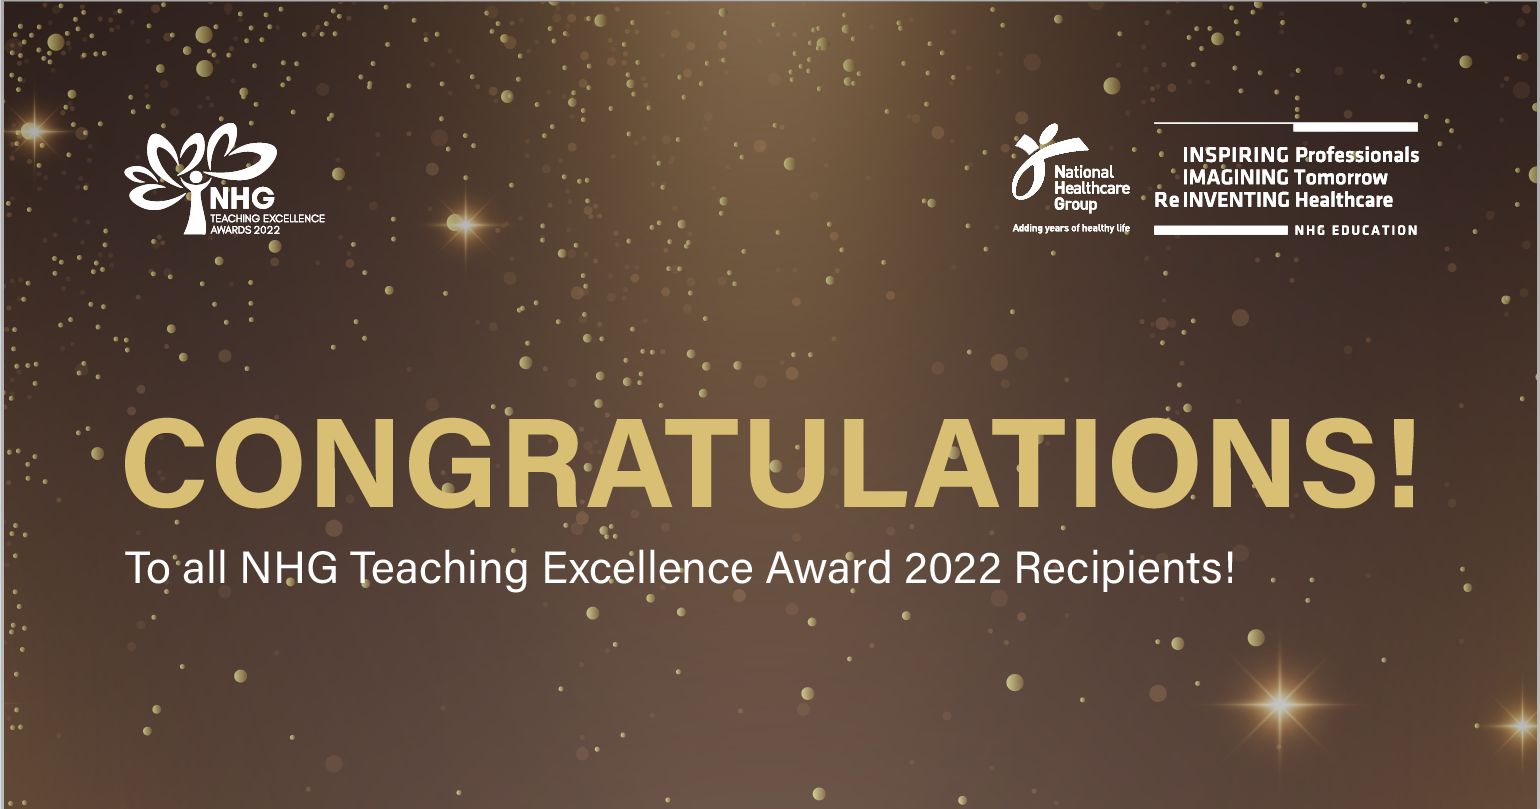 𝗛𝗲𝗮𝗿𝘁𝗶𝗲𝘀𝘁 𝗖𝗼𝗻𝗴𝗿𝗮𝘁𝘂𝗹𝗮𝘁𝗶𝗼𝗻𝘀 👏🏽👏🏽👏🏽 𝘁𝗼 𝗔𝗟𝗟 recipients of The 2020 Teaching Excellence Awards🥇🥇🥇!
And a 𝗛𝗔𝗣𝗣𝗬 𝗧𝗘𝗔𝗖𝗛𝗘𝗥𝗦’ 𝗗𝗔𝗬🎊🎉!

Click to view all the recipients of this year's TEA Awards!